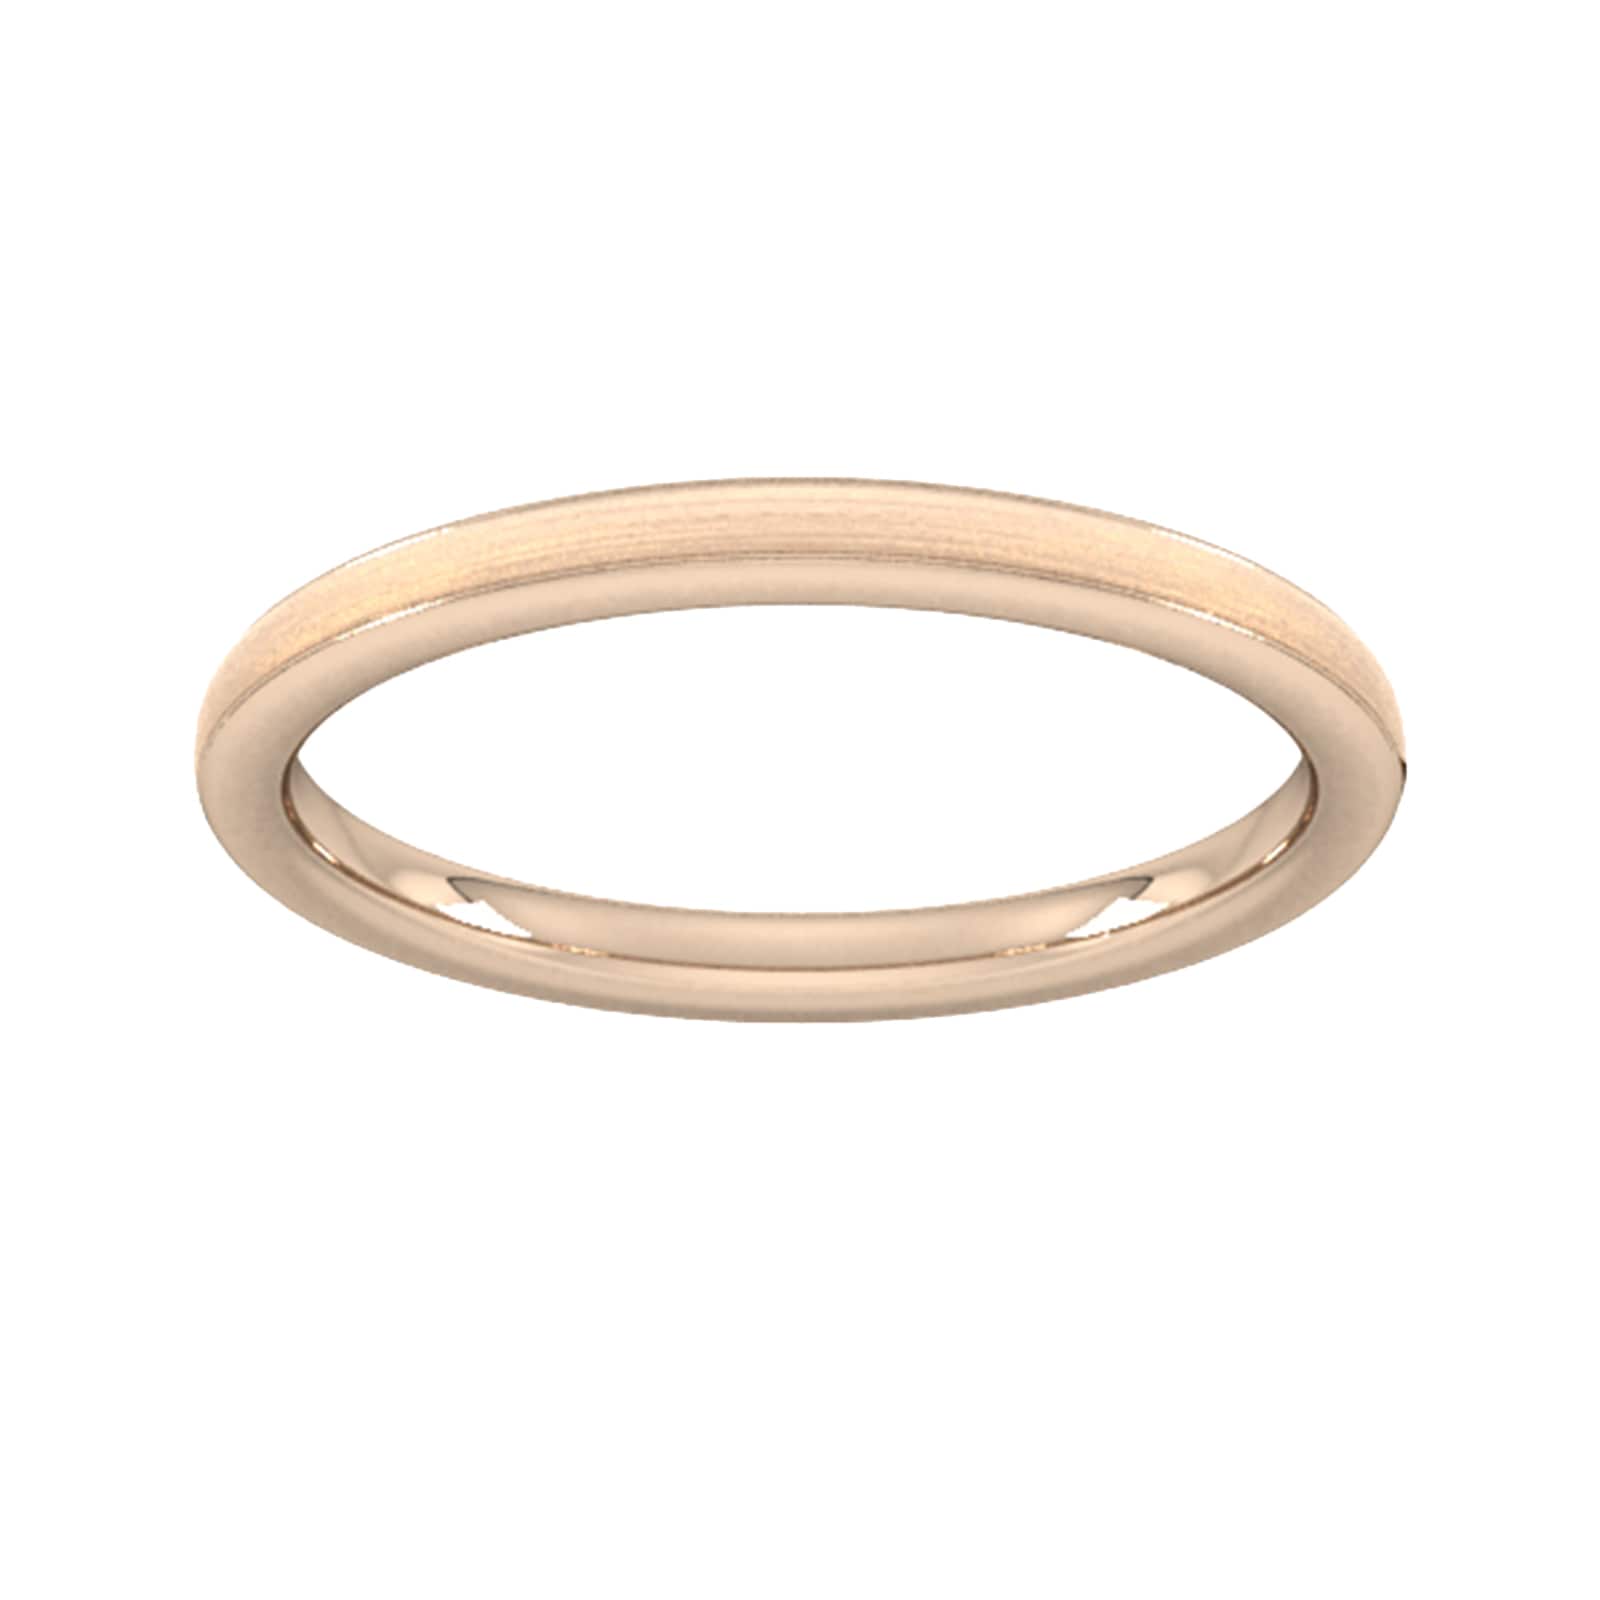 2mm D Shape Heavy Matt Centre With Grooves Wedding Ring In 9 Carat Rose Gold - Ring Size Z